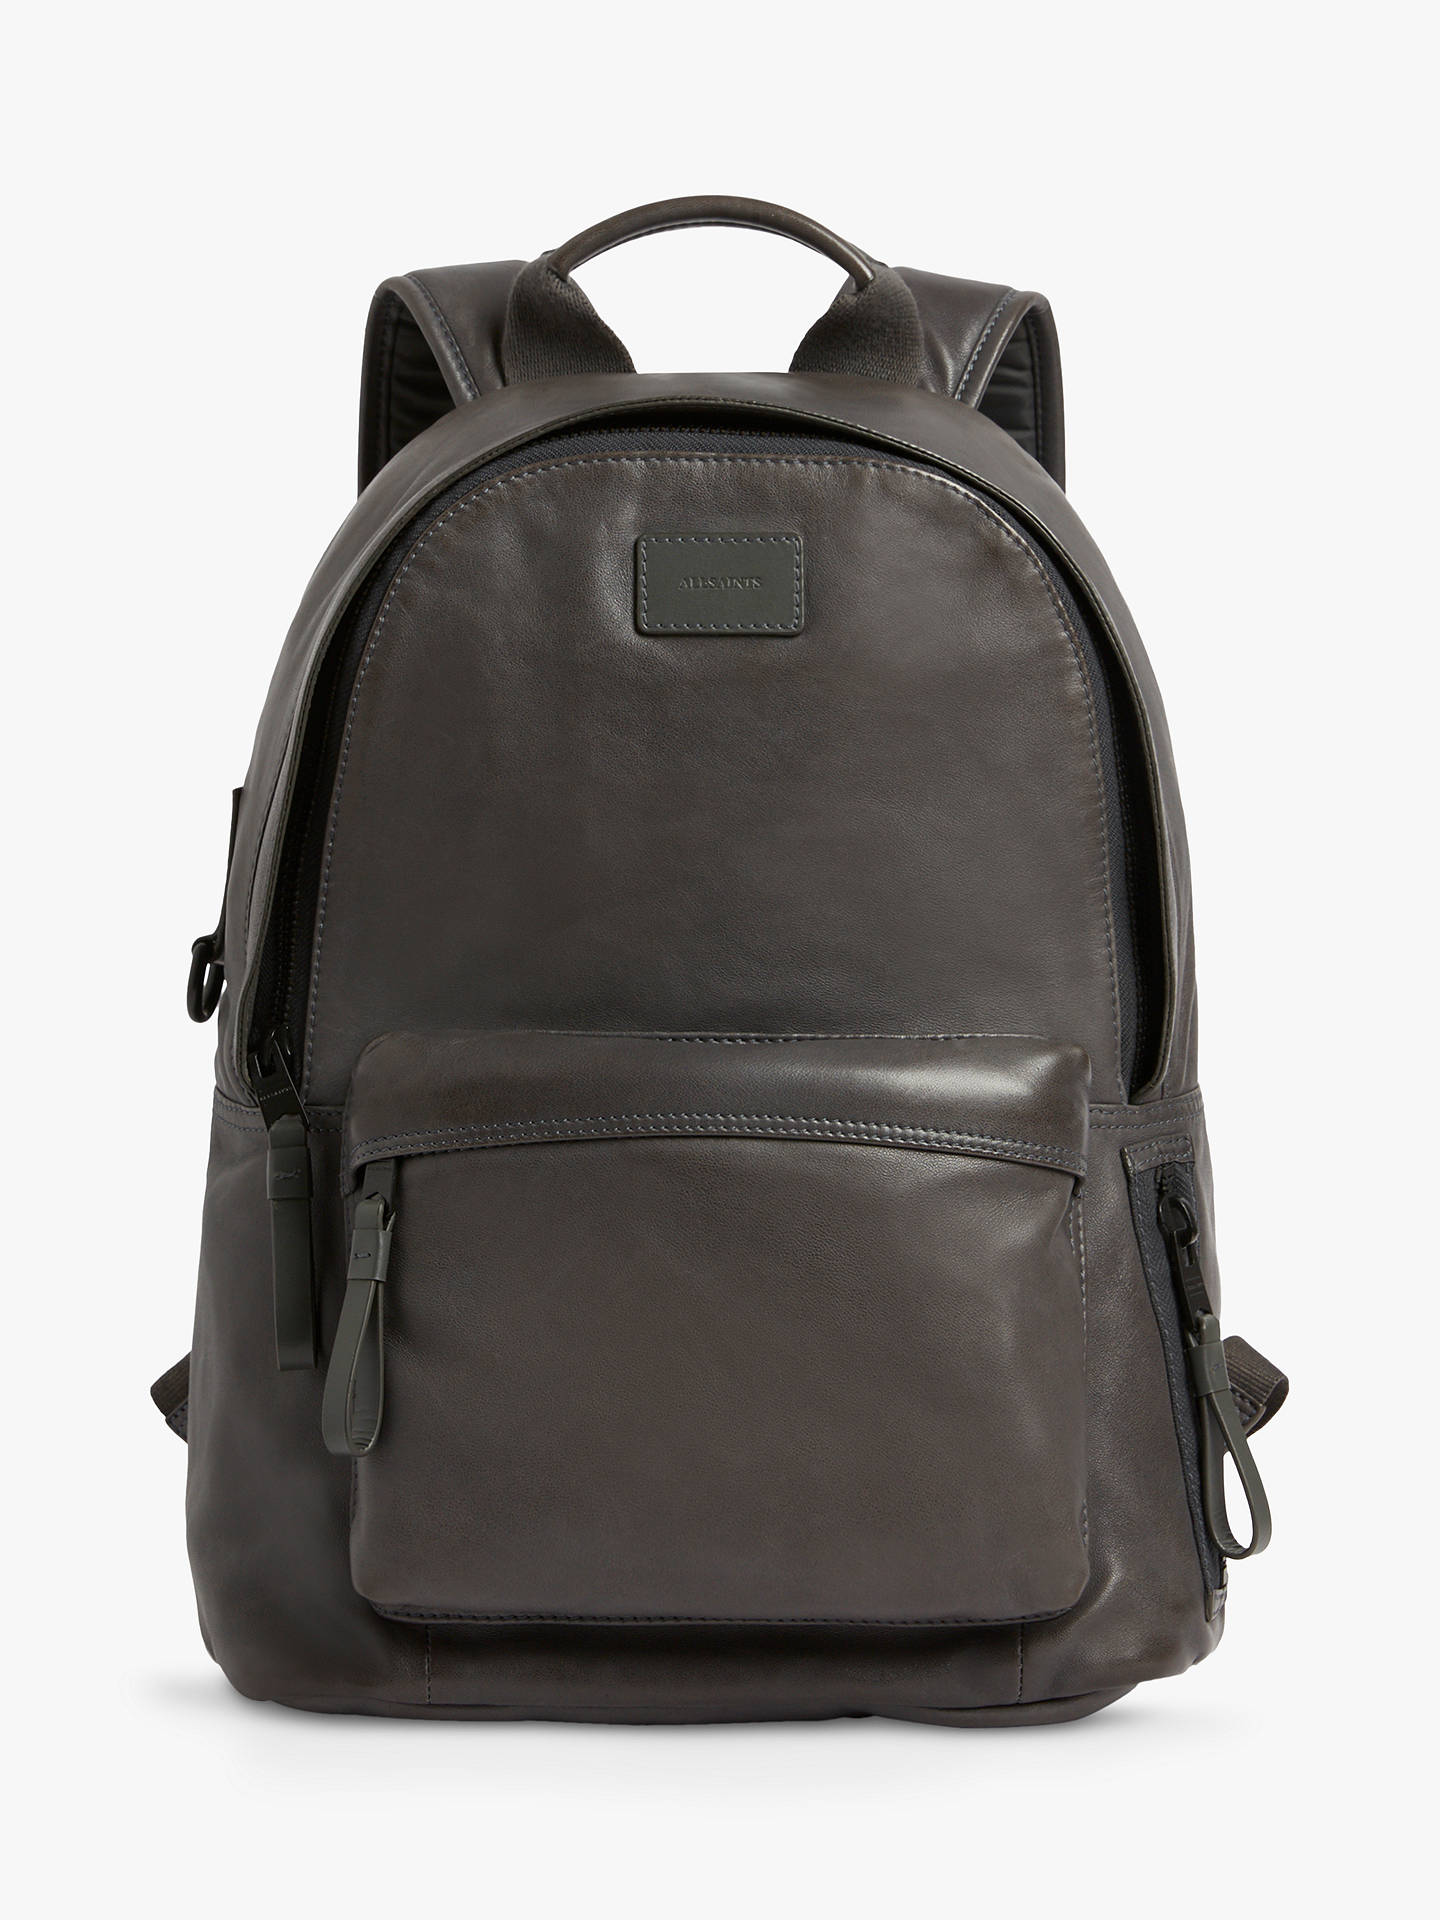 AllSaints Arena Leather Backpack, Smoke Grey at John Lewis & Partners